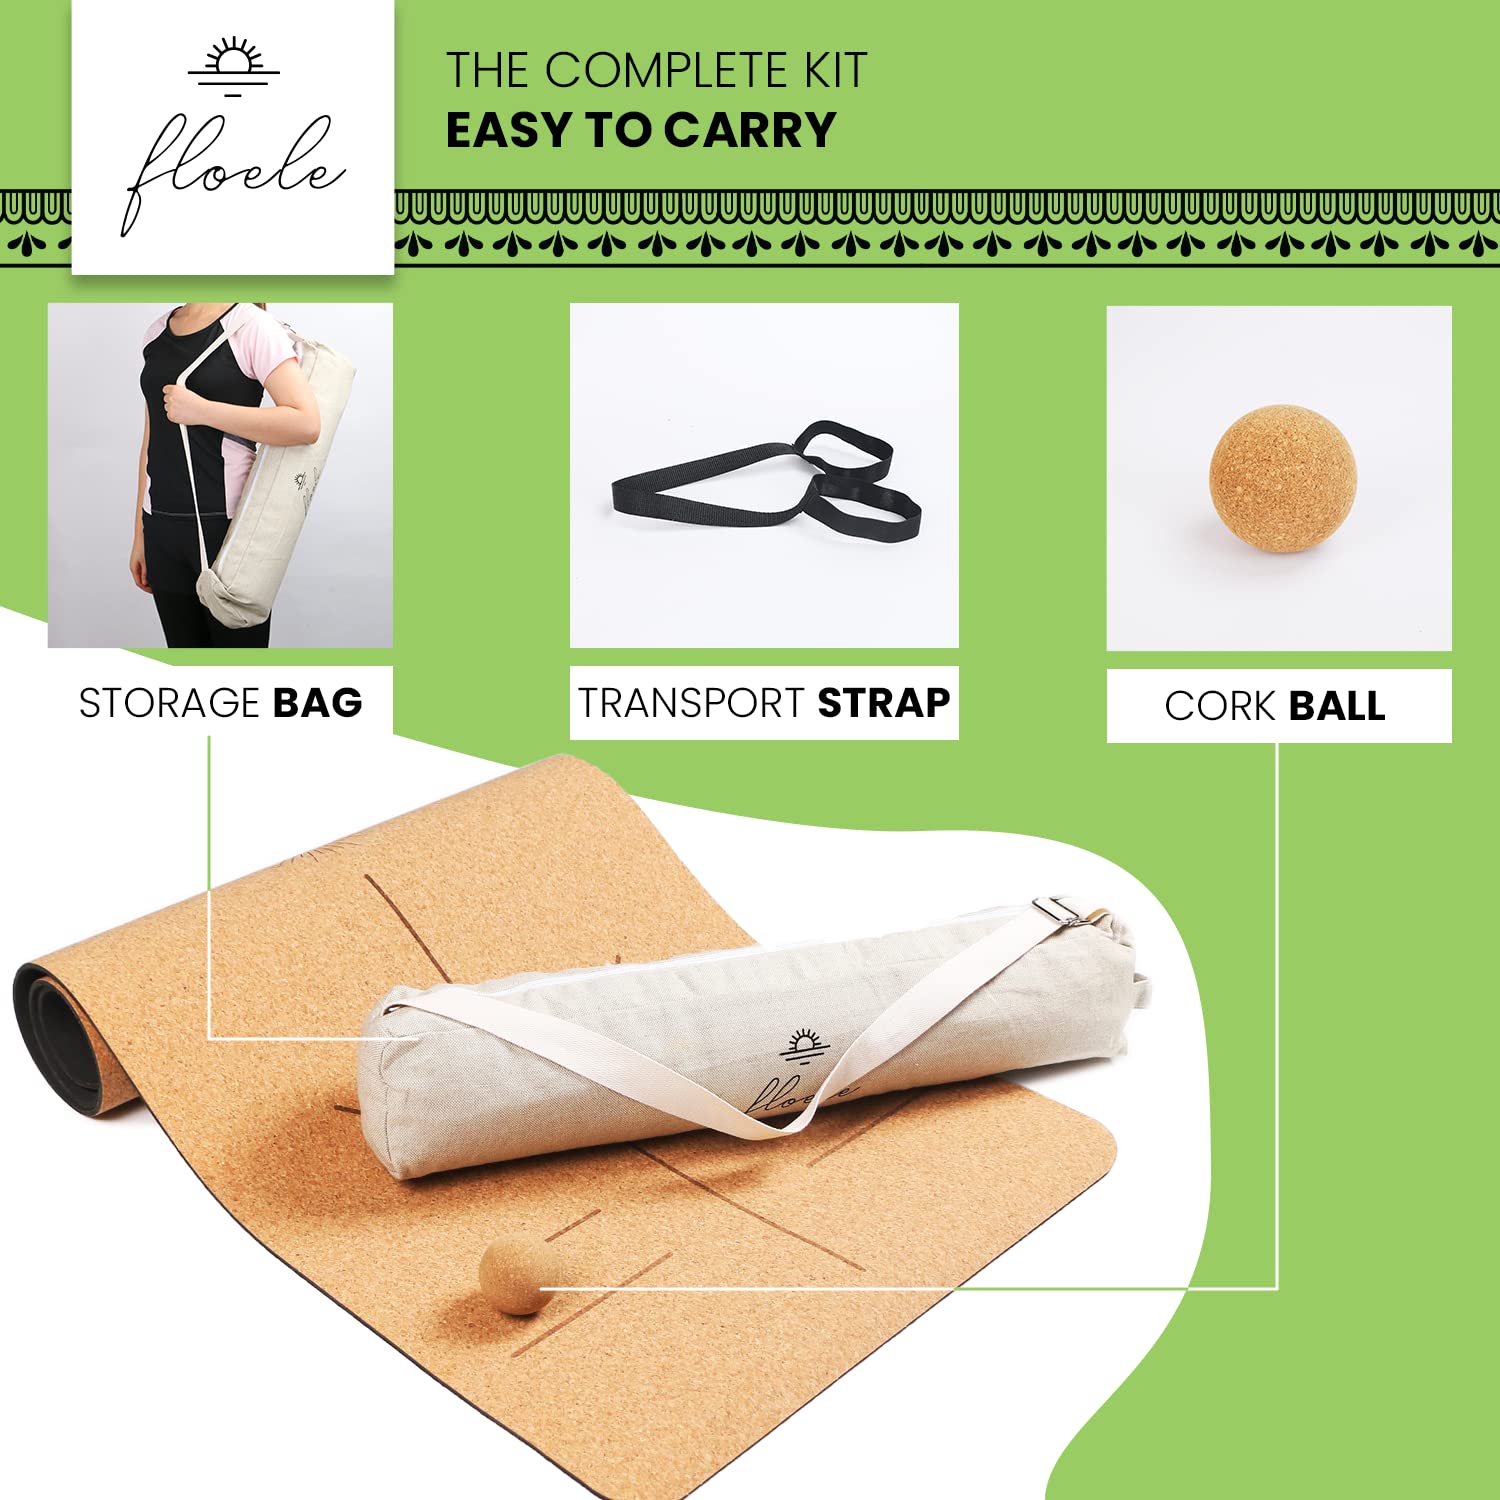 The Best Eco-Friendly Cork Travel Yoga Mat - Foldable and Lightweight